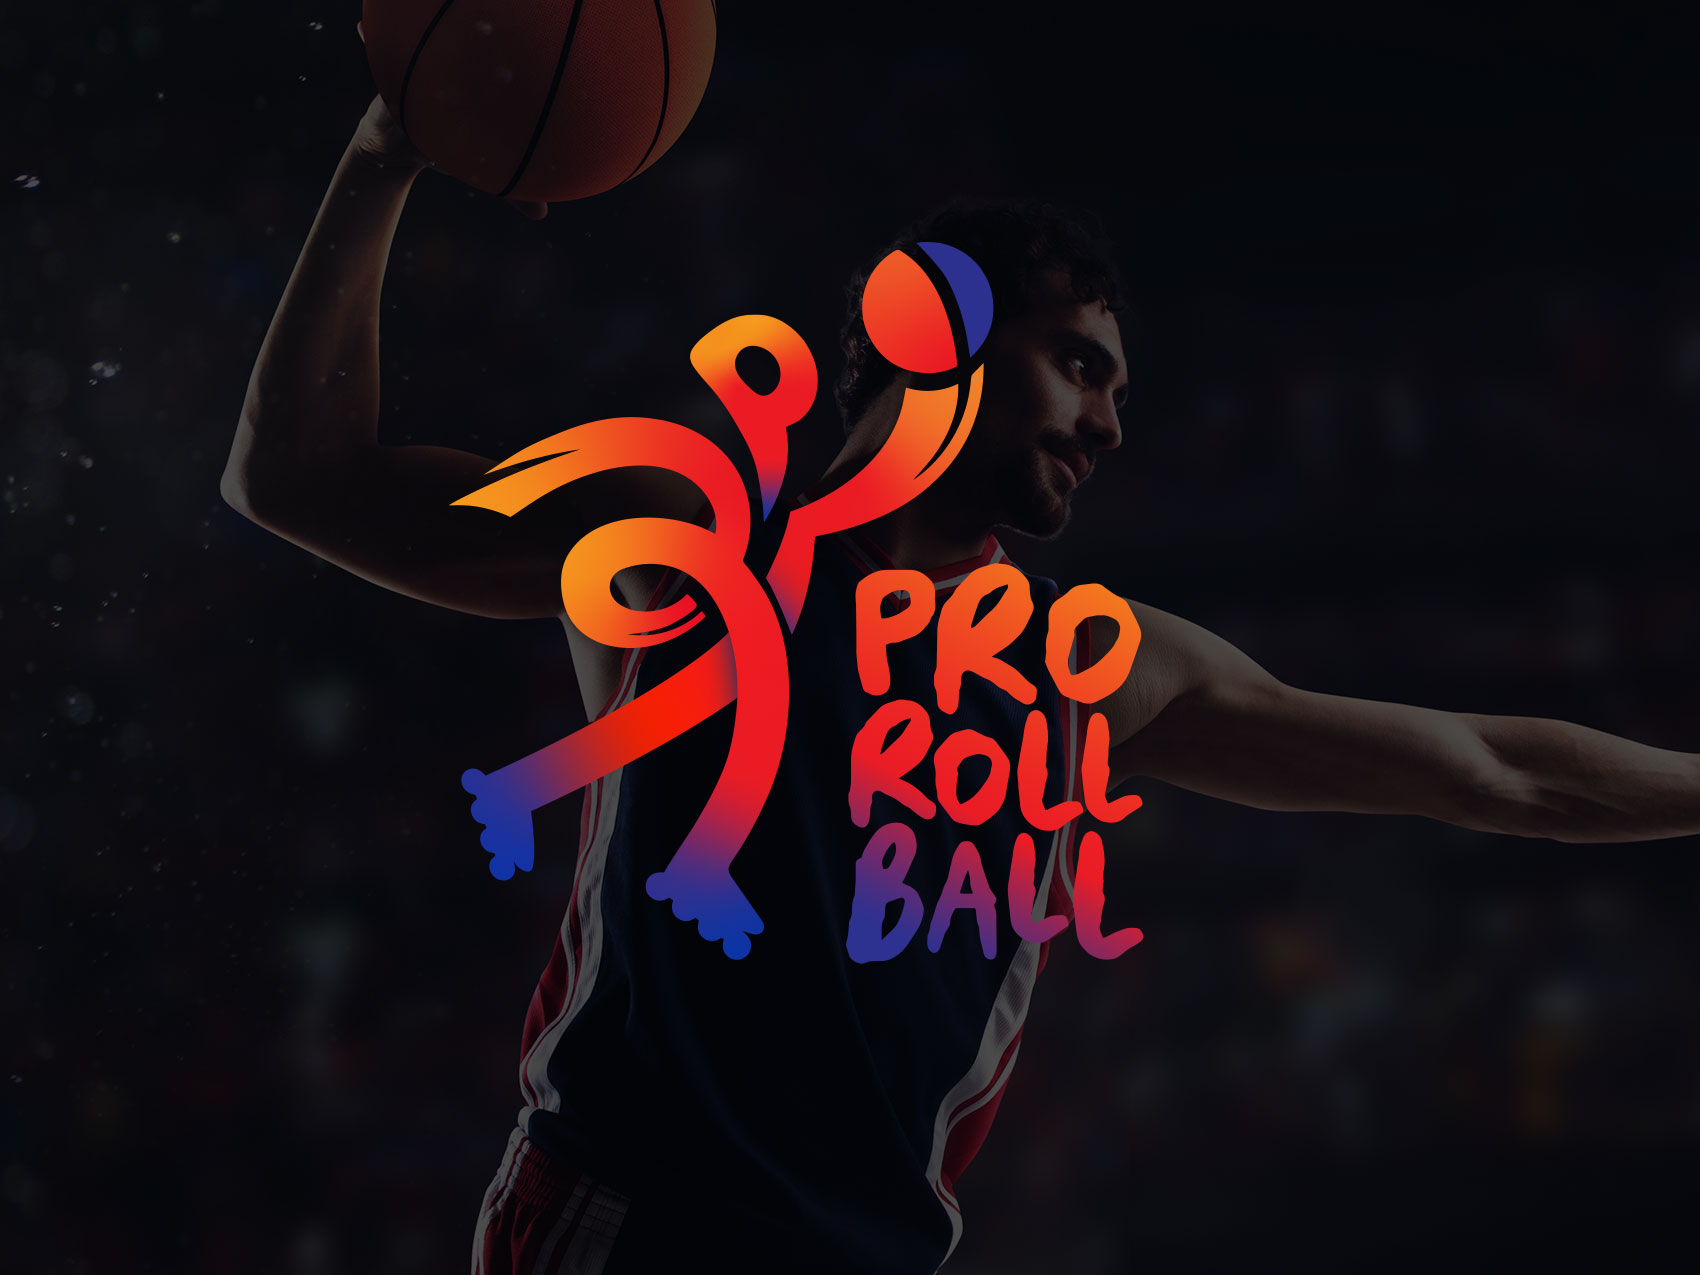 Designing the identity for Pro Roll Ball